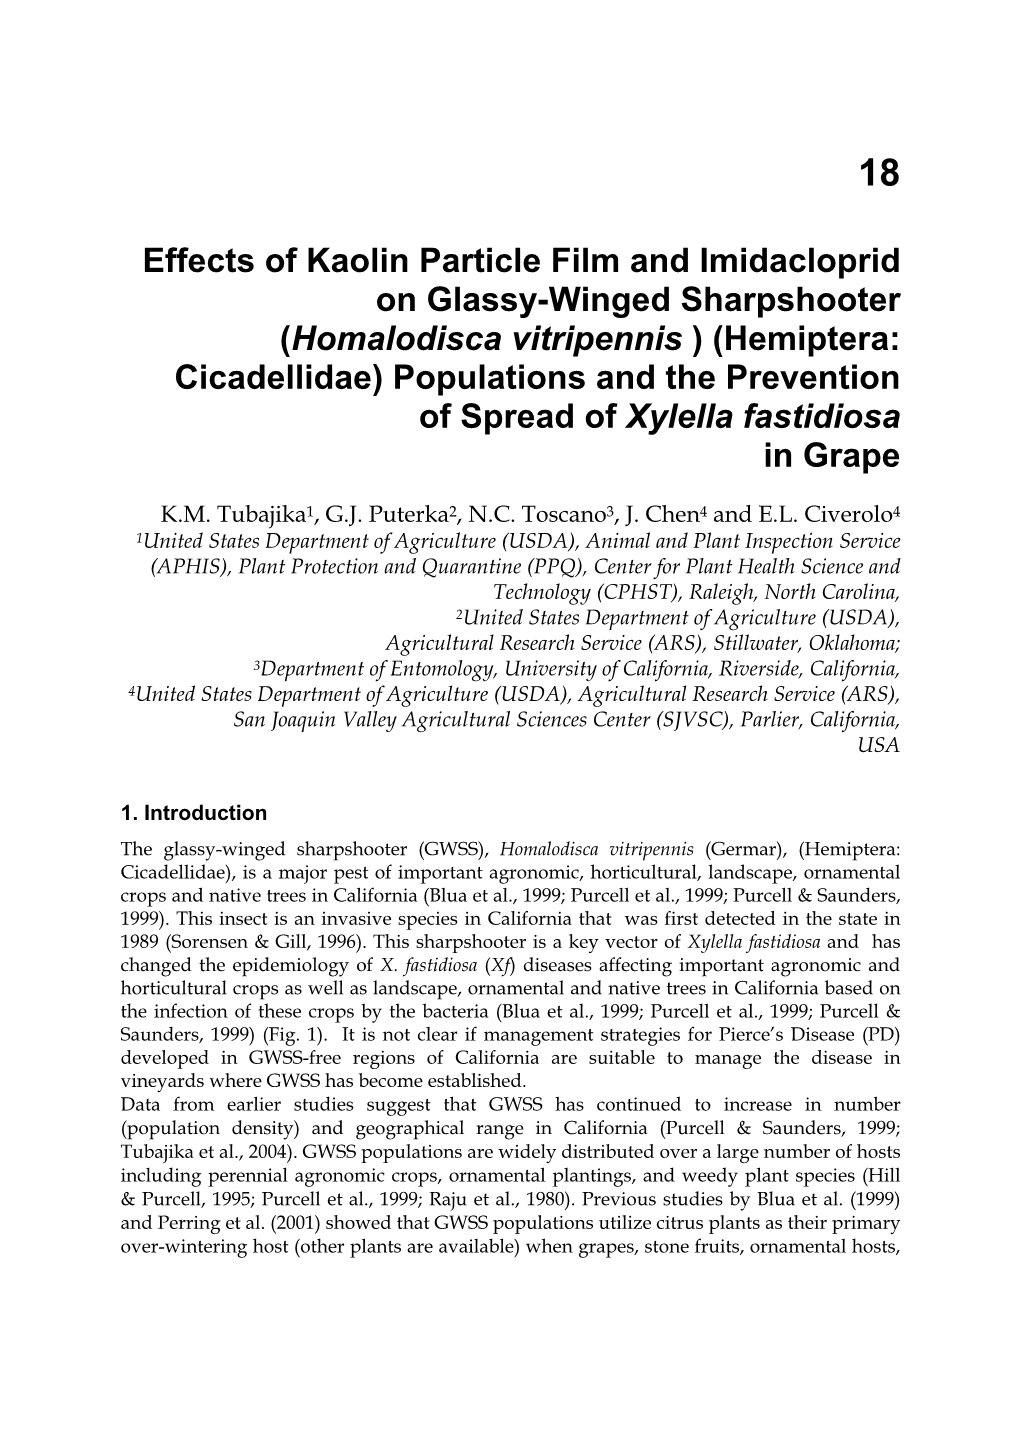 Effects of Kaolin Particle Film and Imidacloprid